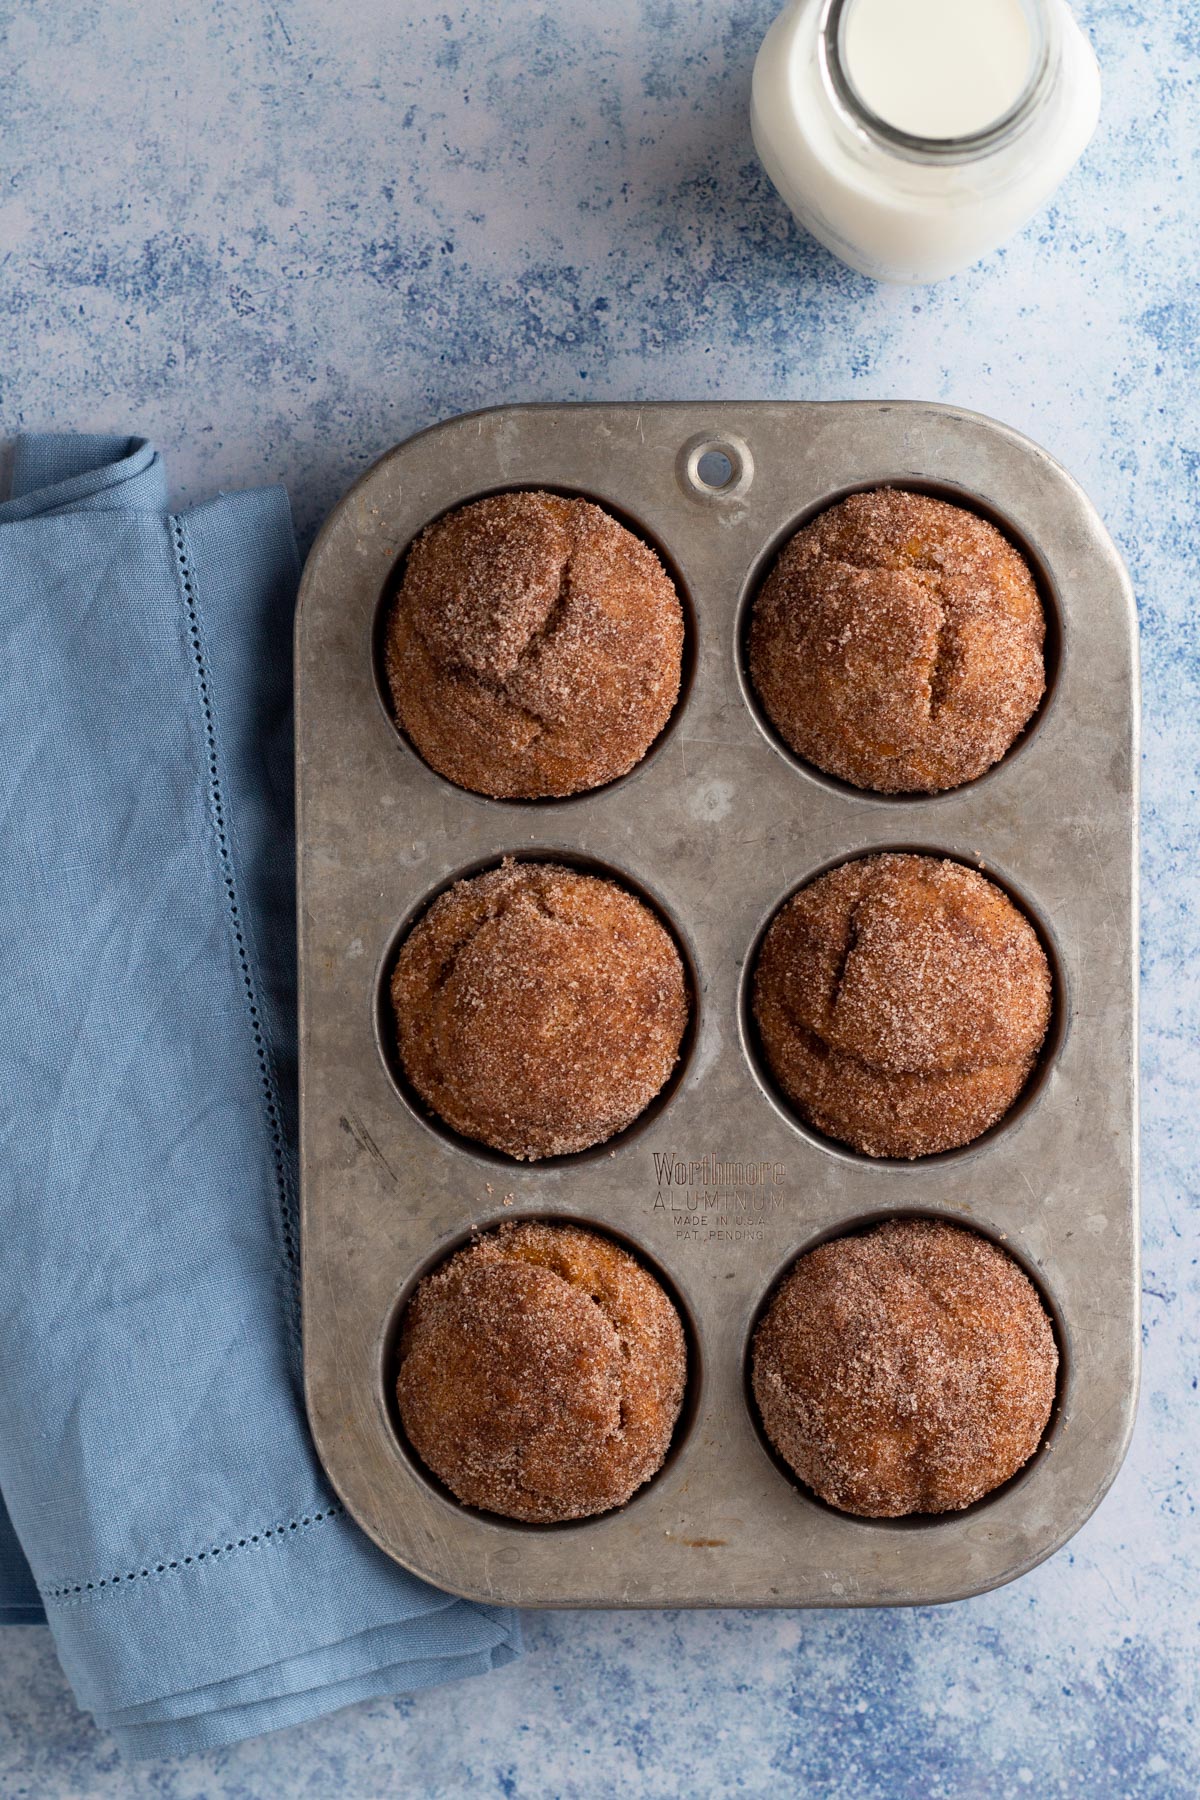 Cinnamon sugar-coated donut muffins in a muffin pan on a blue surface with a napkin and glass of milk.